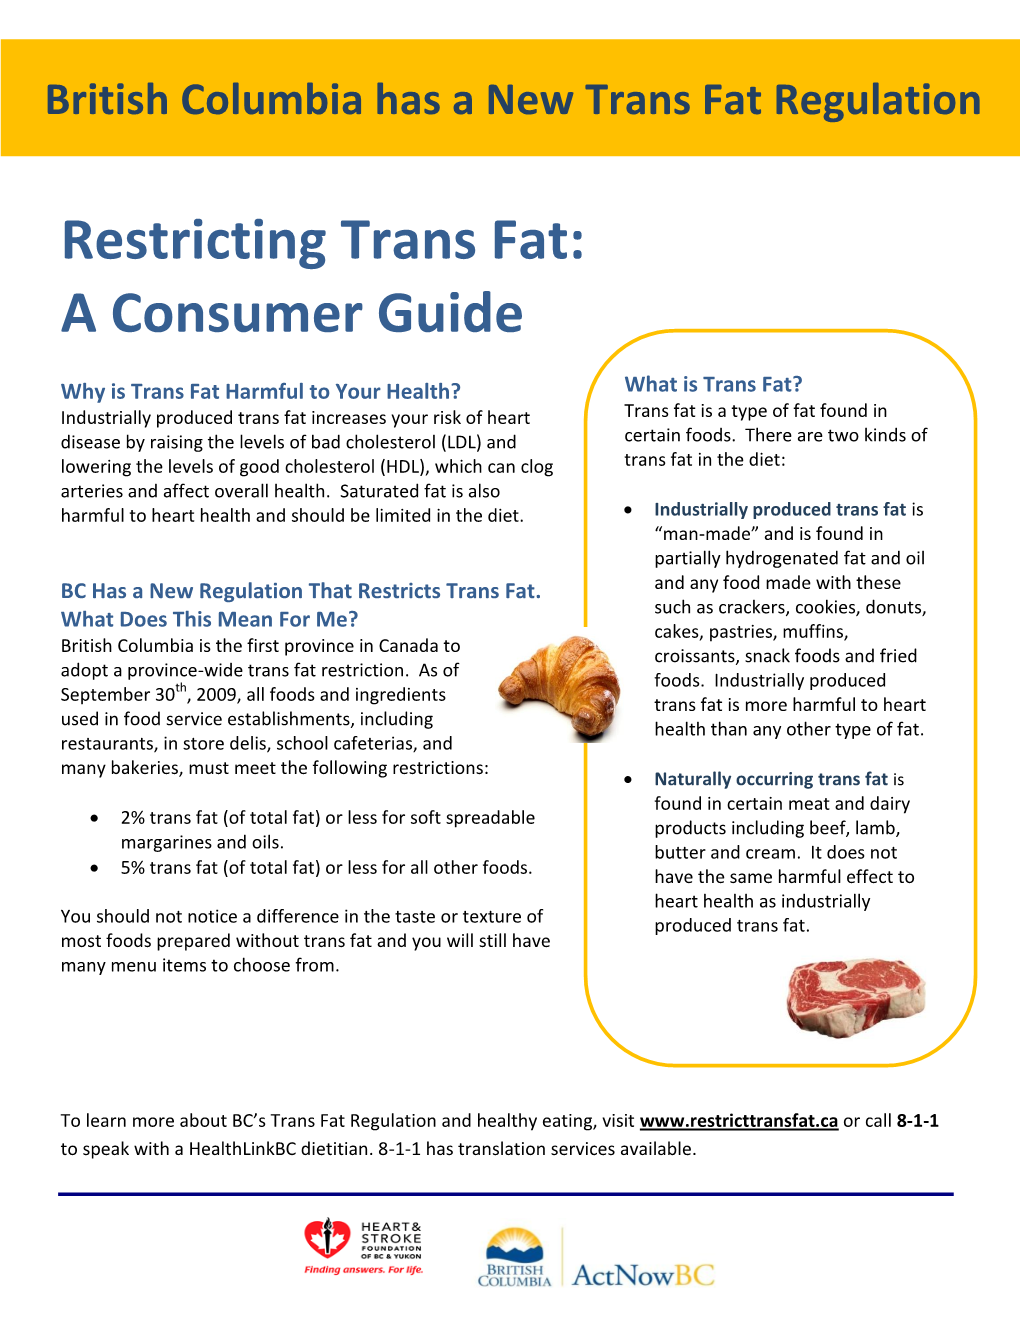 Restricting Trans Fat: a Consumer Guide